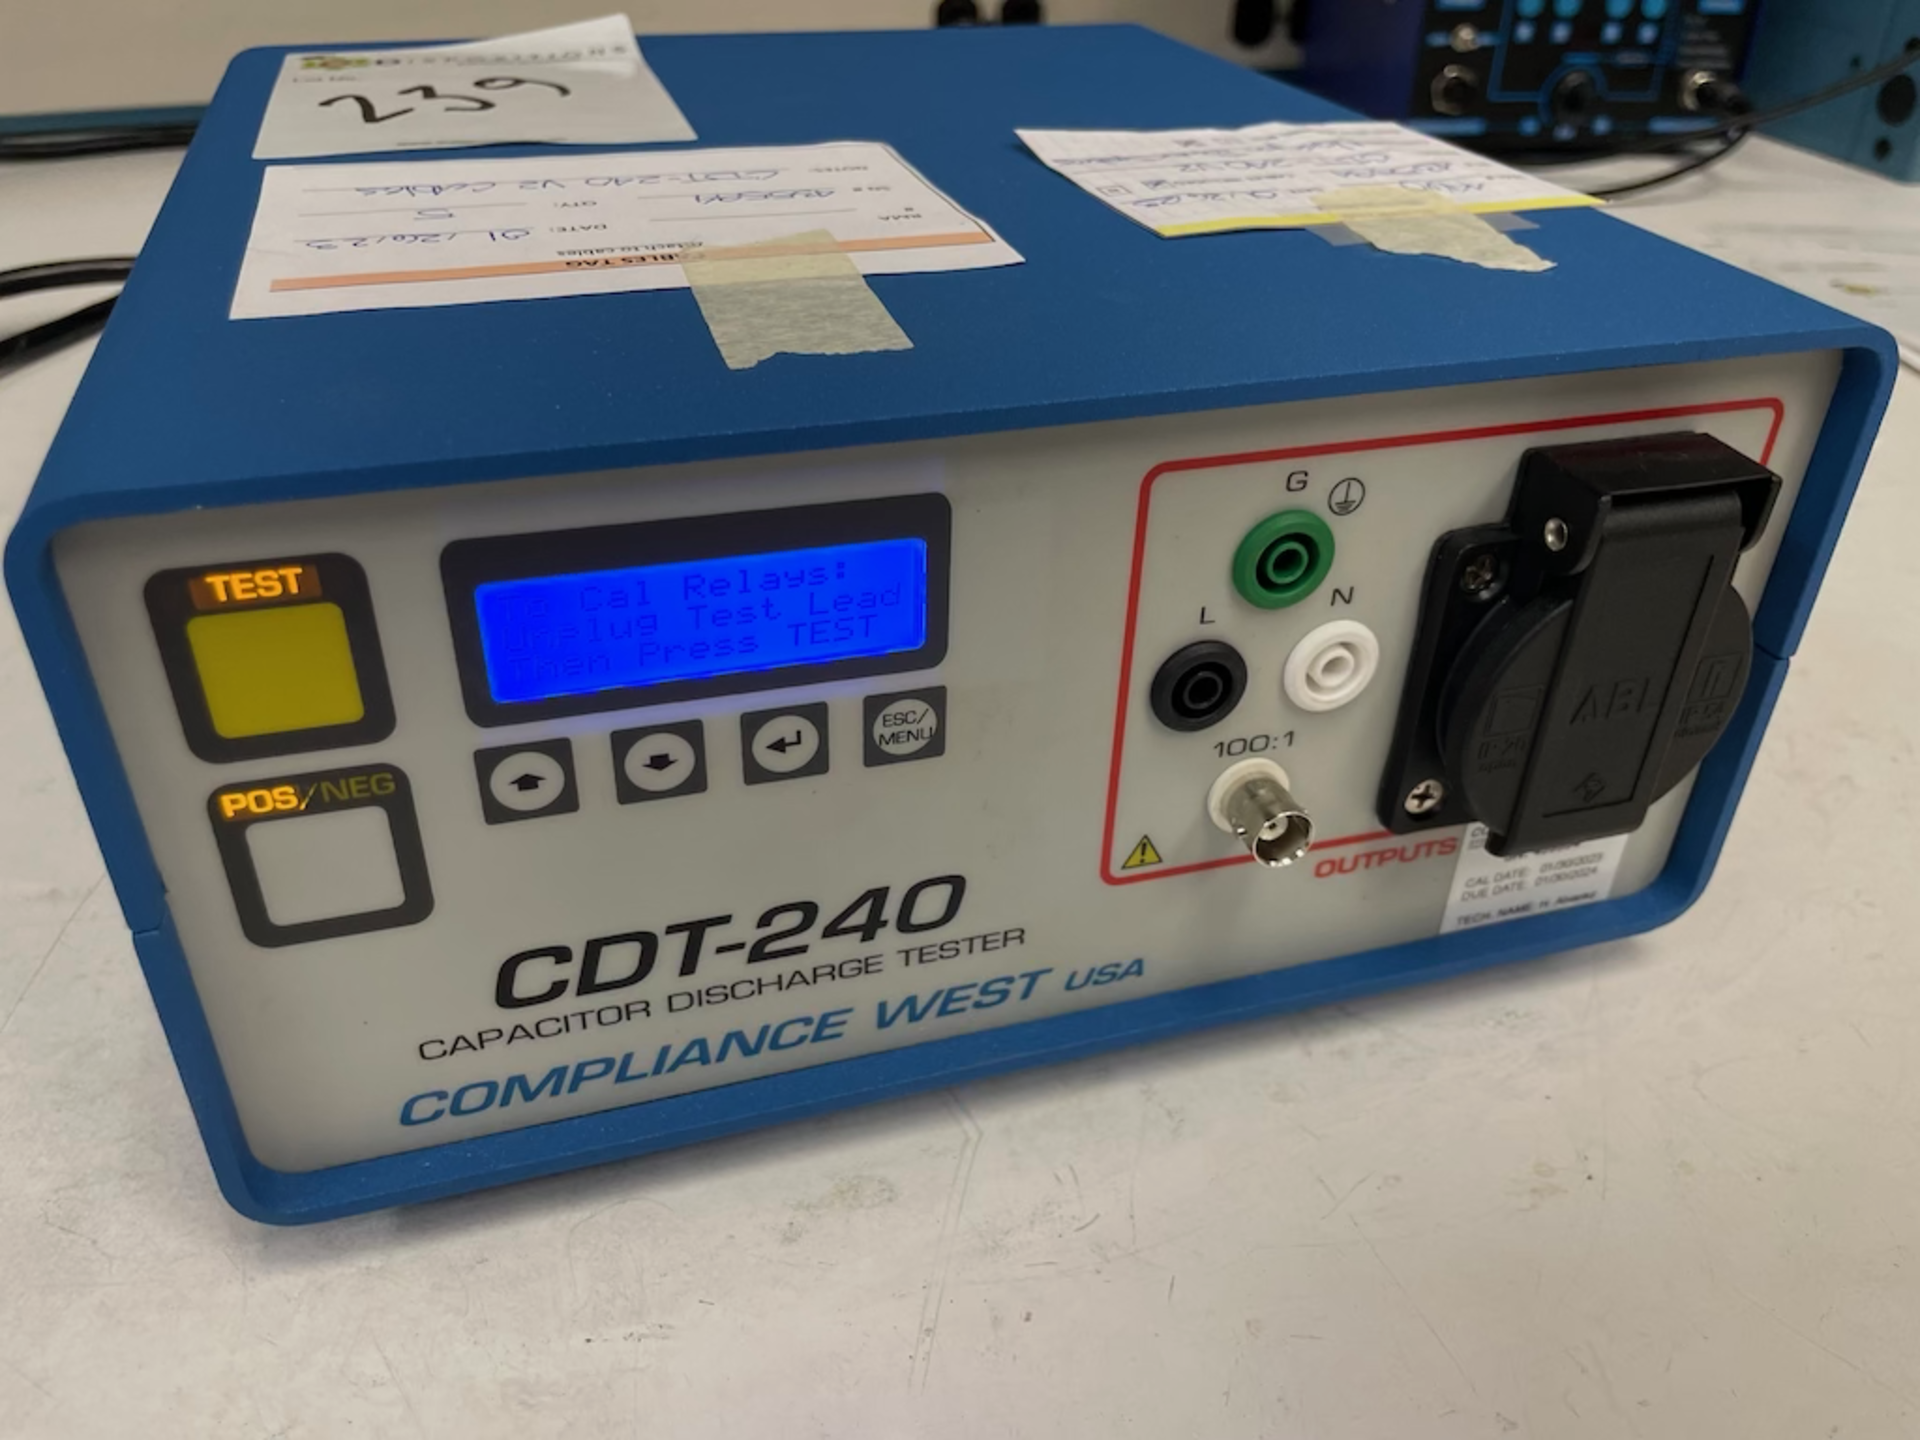 Compliance West CDT-240 Capacitor Discharge Tester SN/ 435594 - Located in Santa Clara, CA